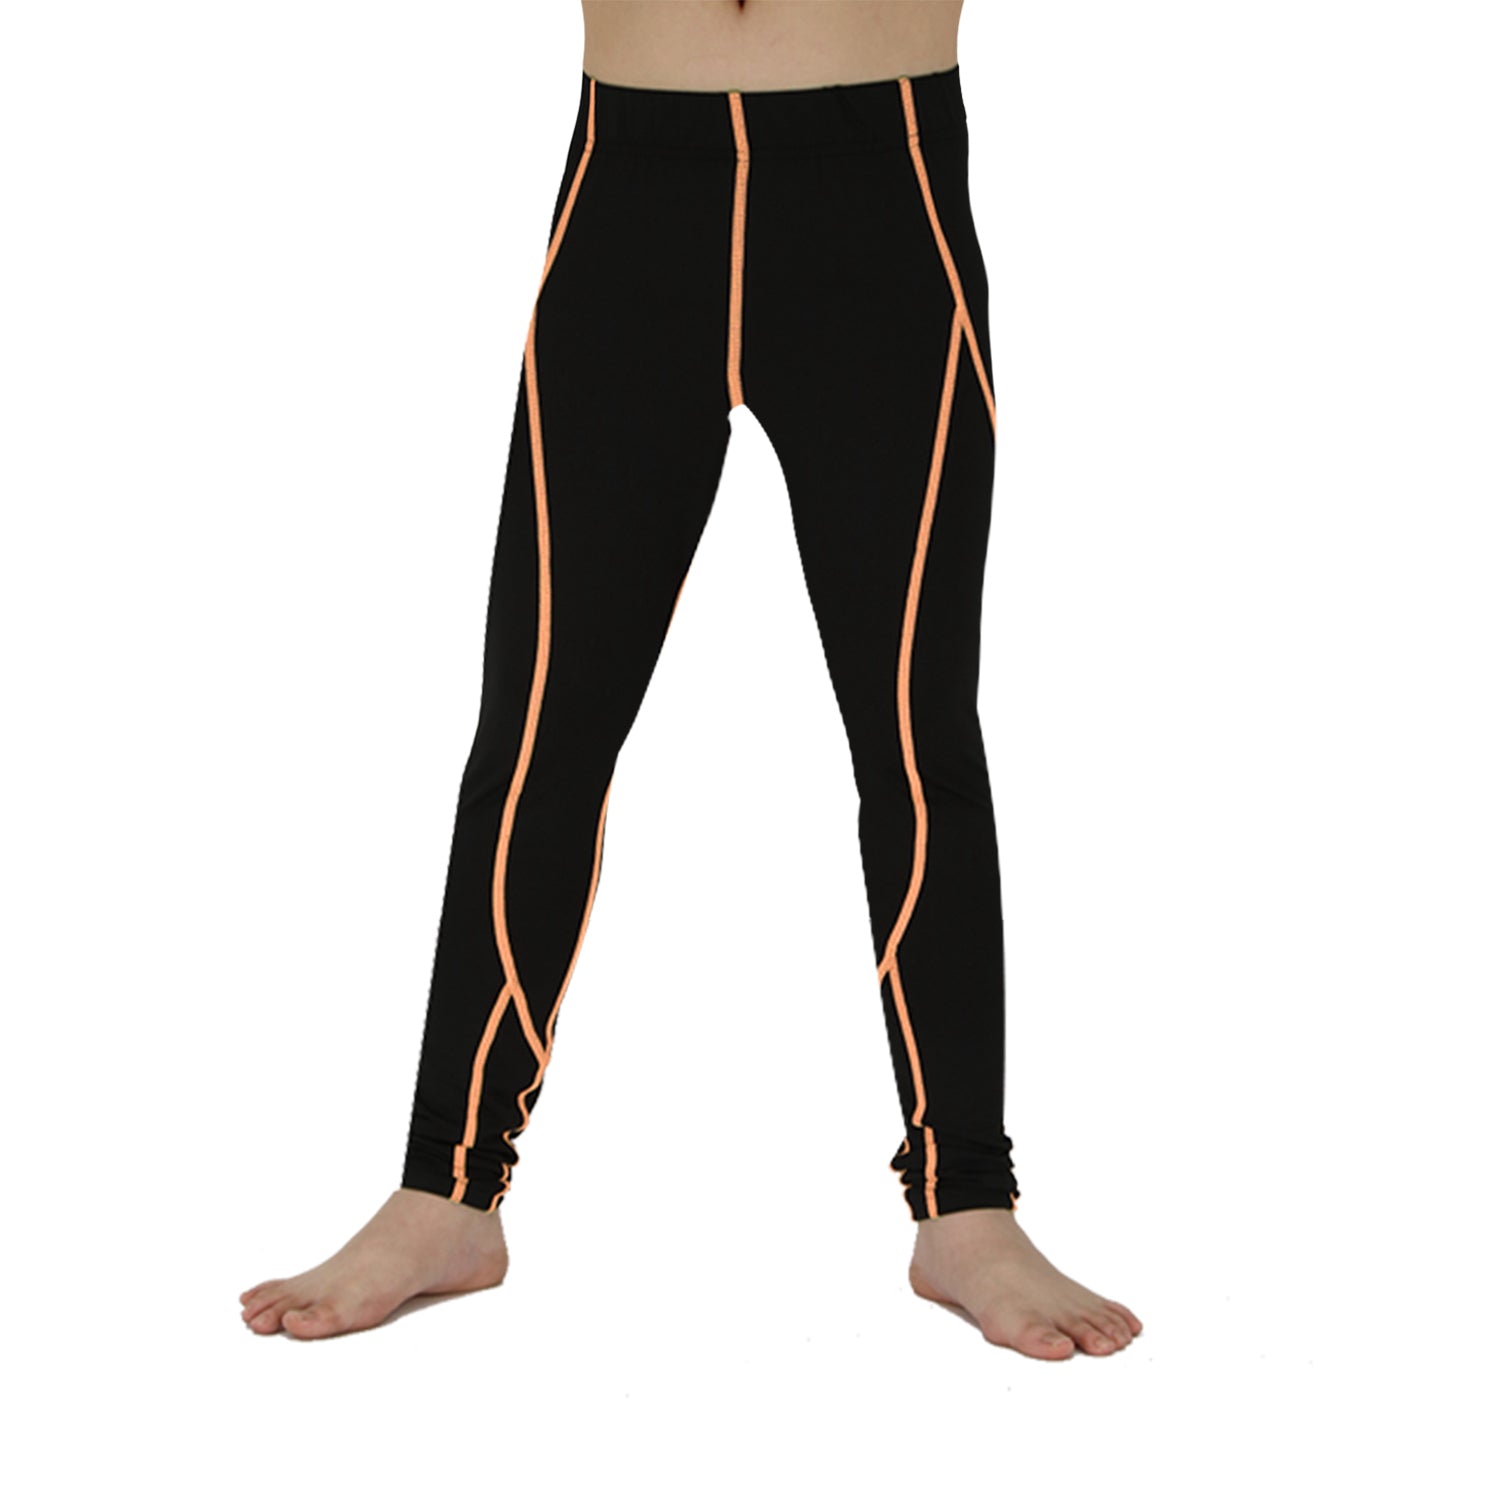 Youth Boys Compression Leggings Girls Athletic Sport Base Layer